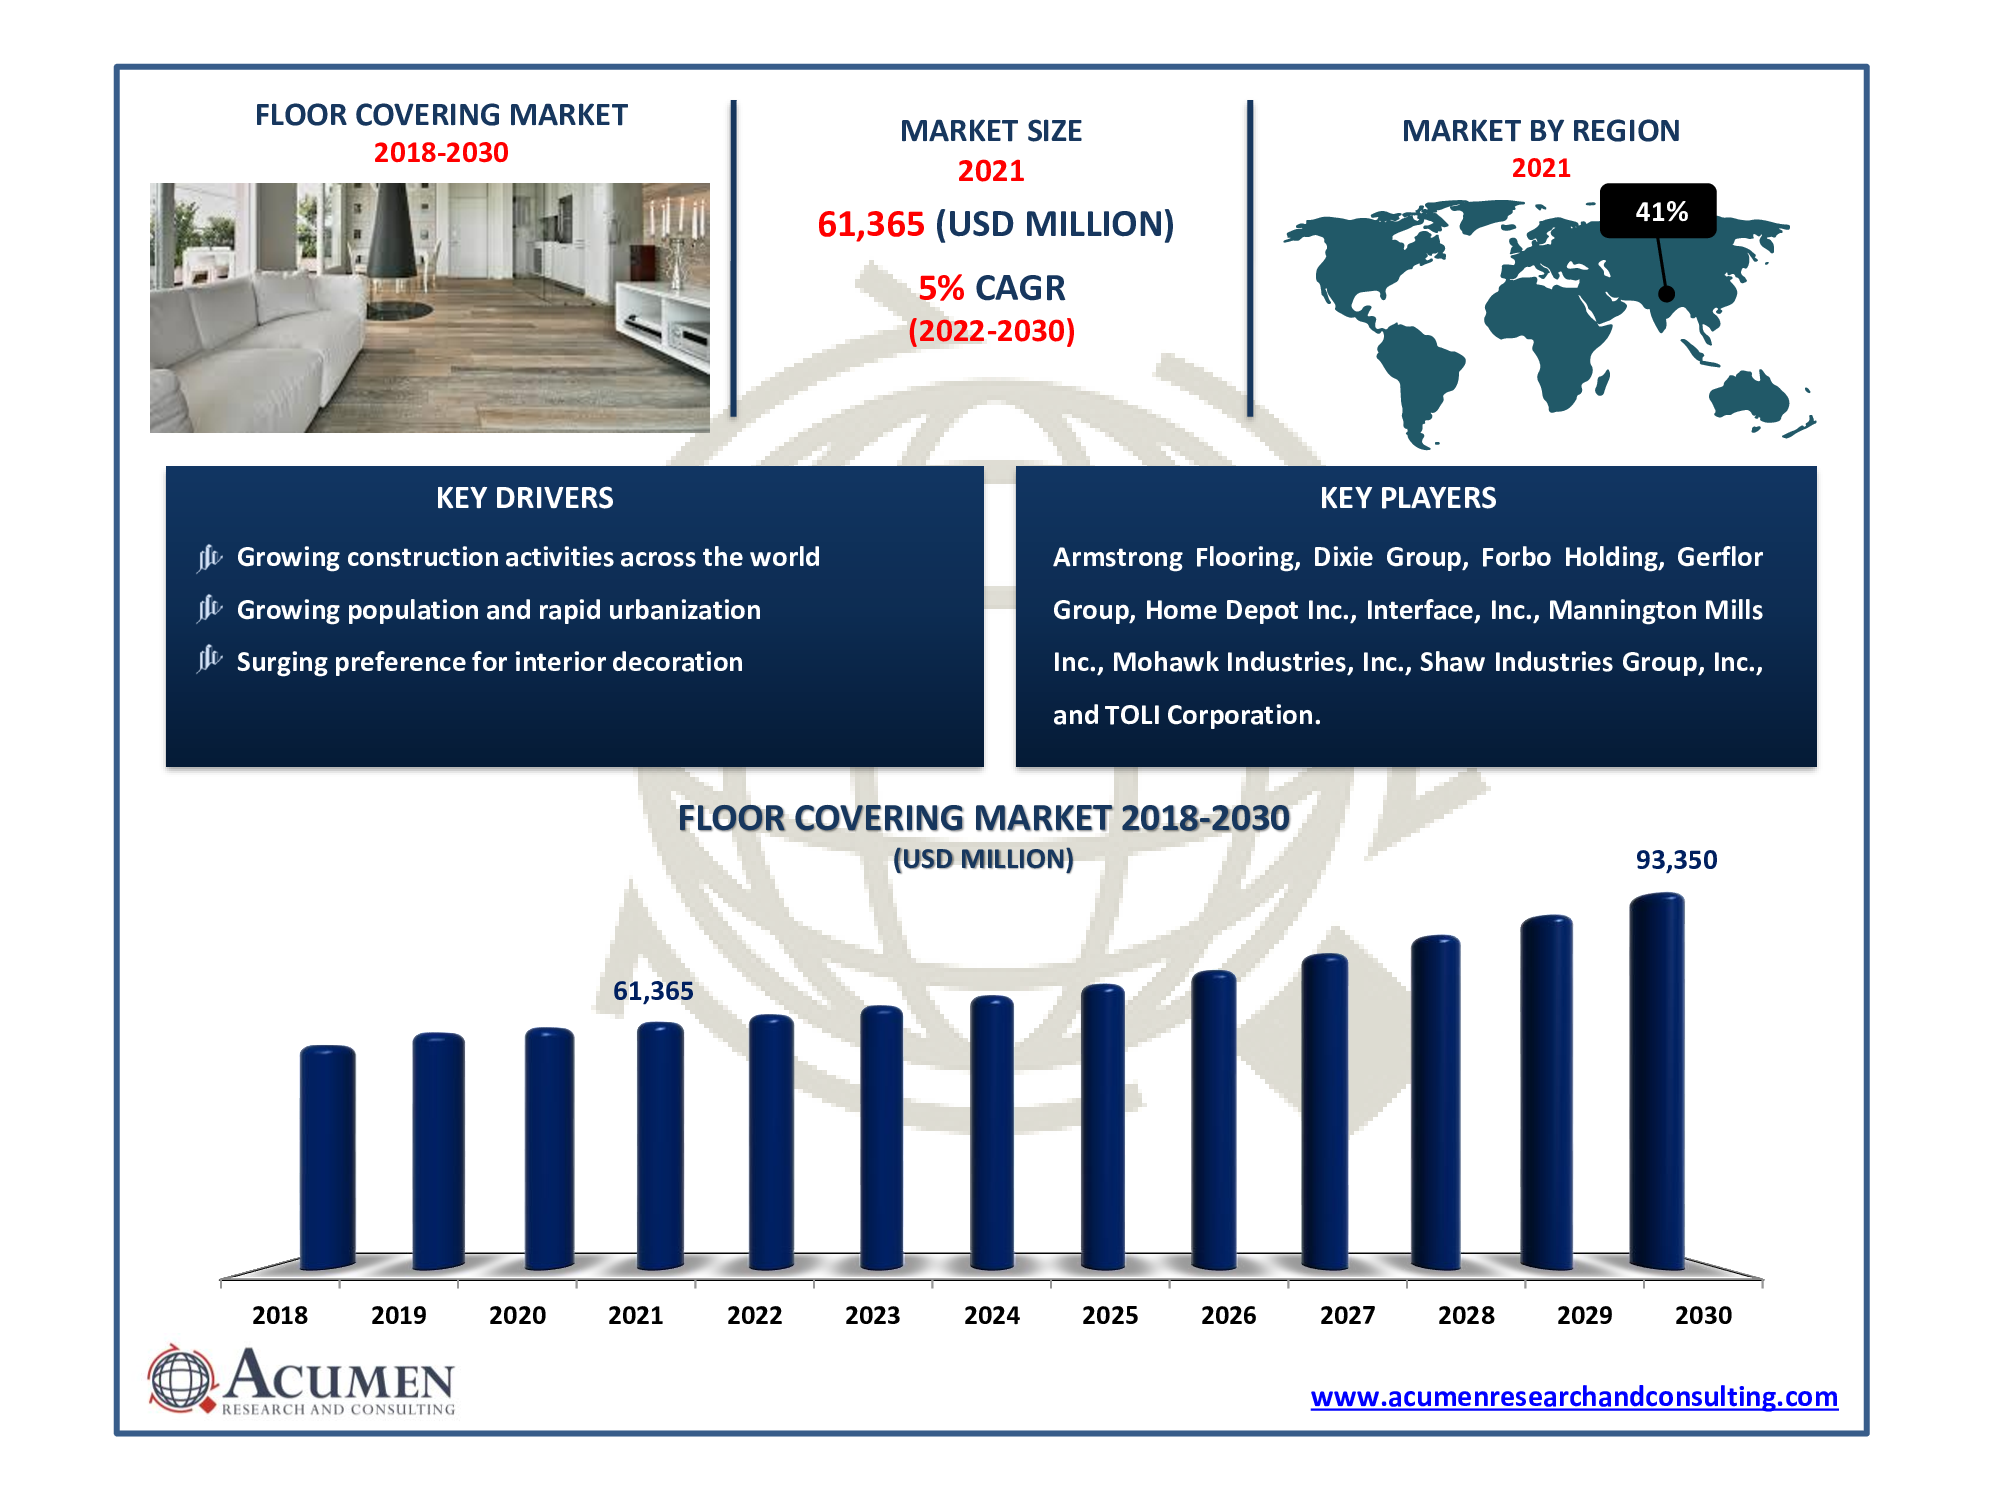 Floor Covering Market size accounted for USD 61,365 Million in 2021 and is estimated to reach USD 93,350 Million by 2030.